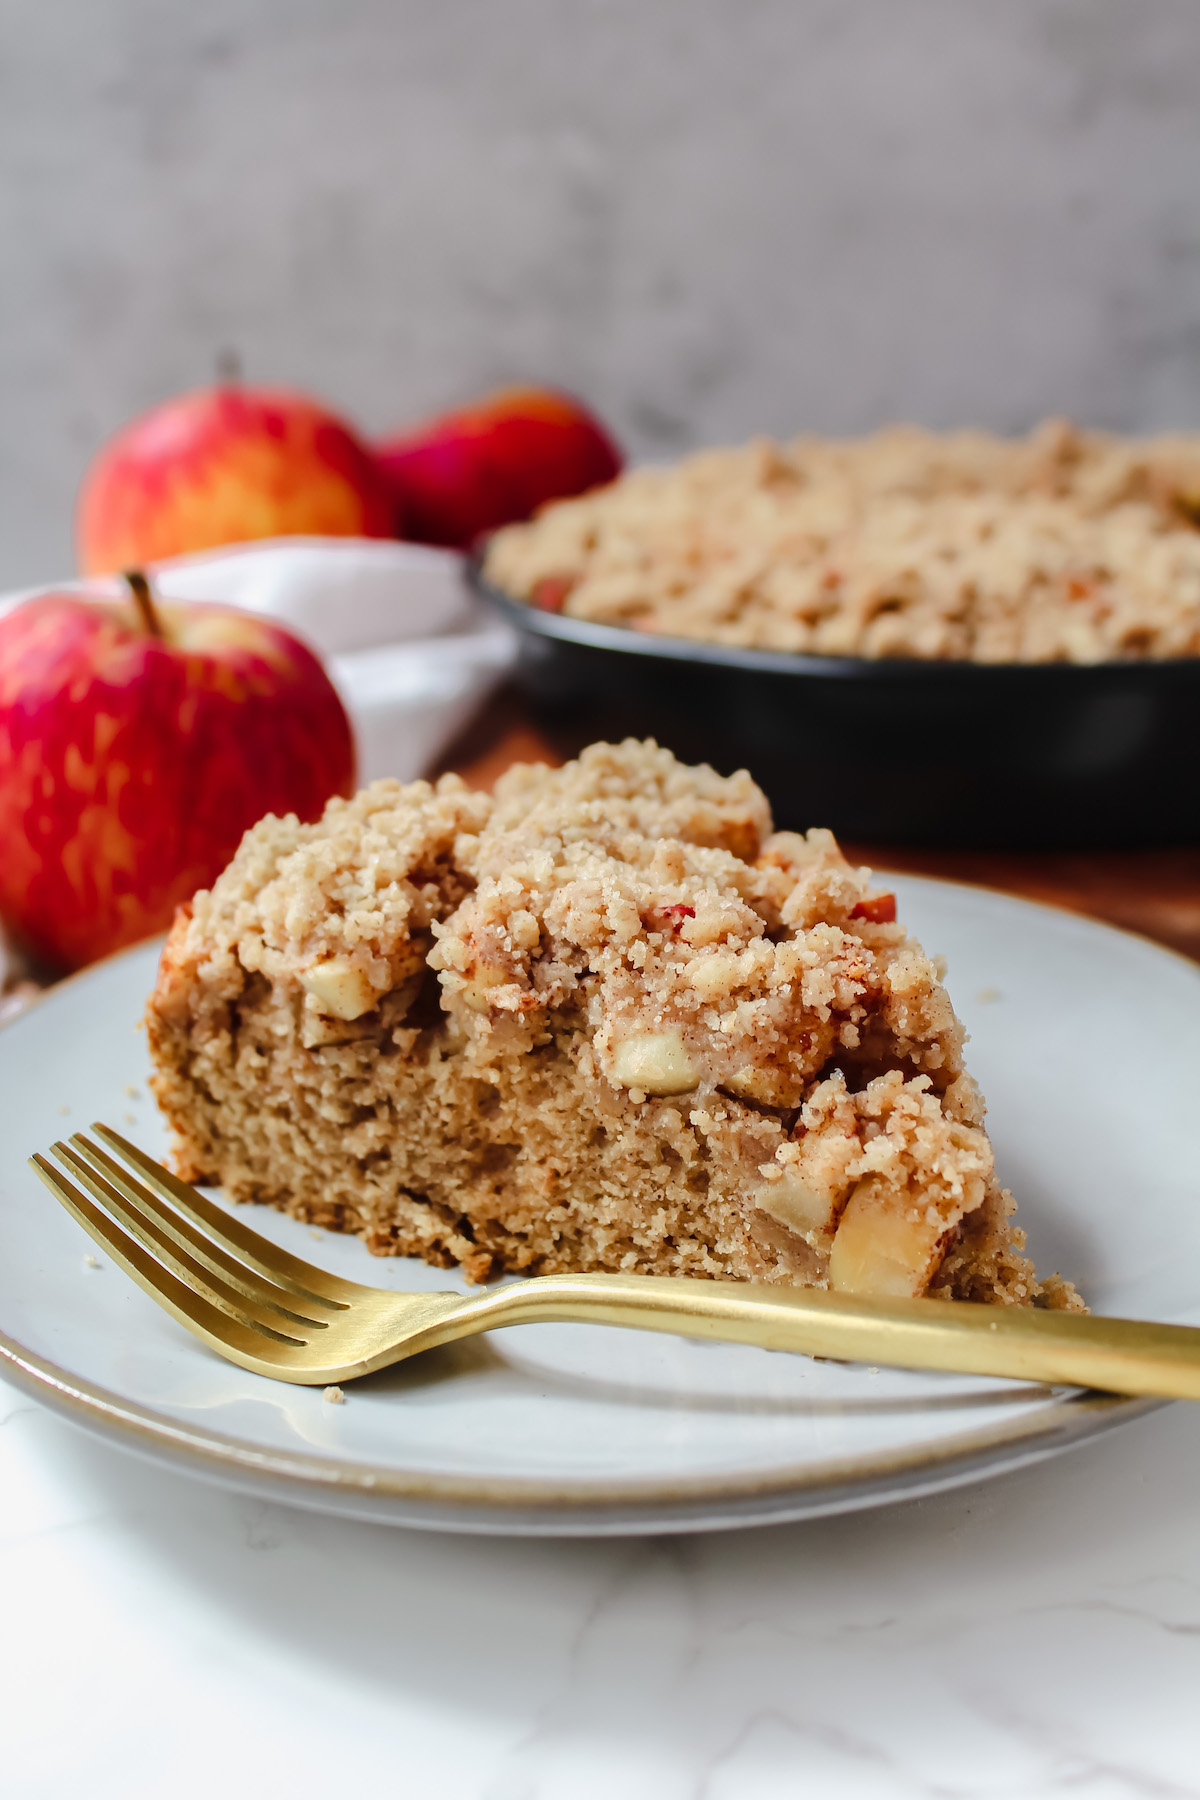 side view shot of a slice of apple crumb cake on a plate with a fork